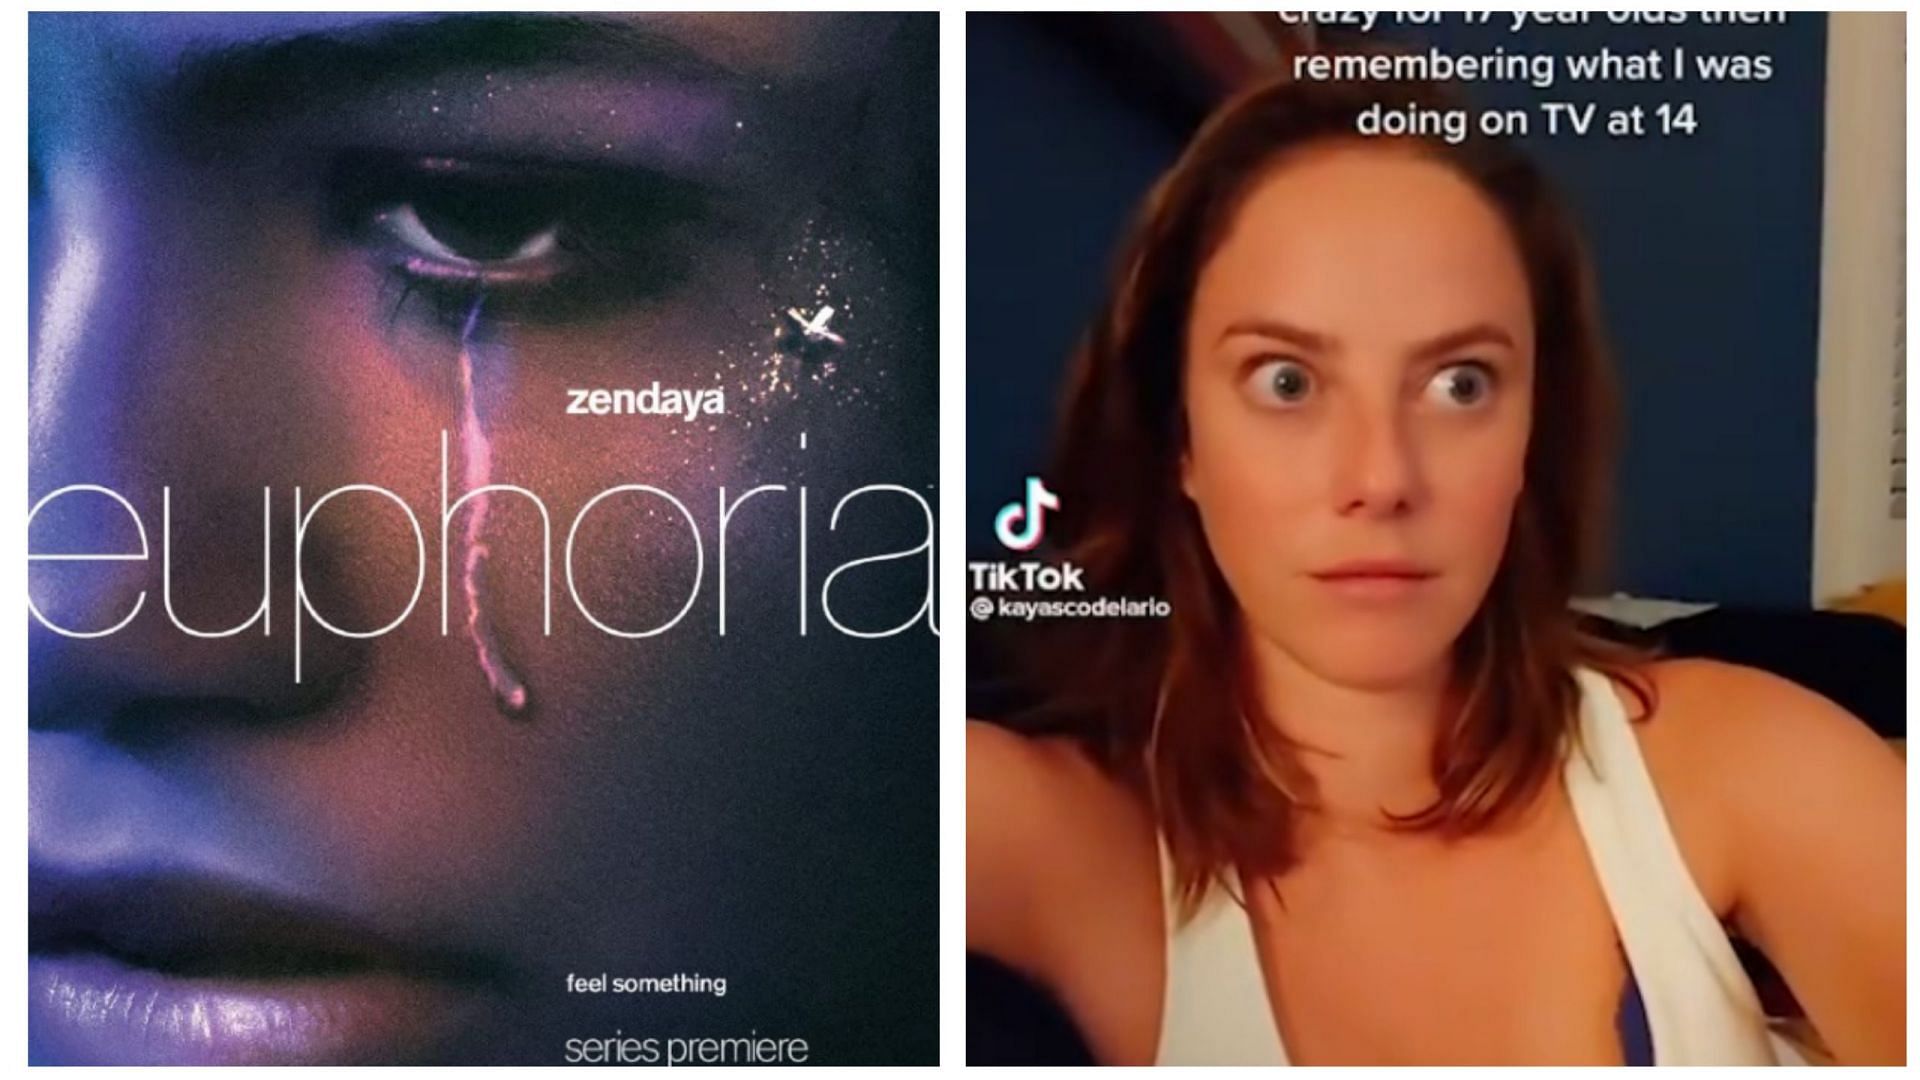 Is Euphoria the new Skins? The answer is more complicated